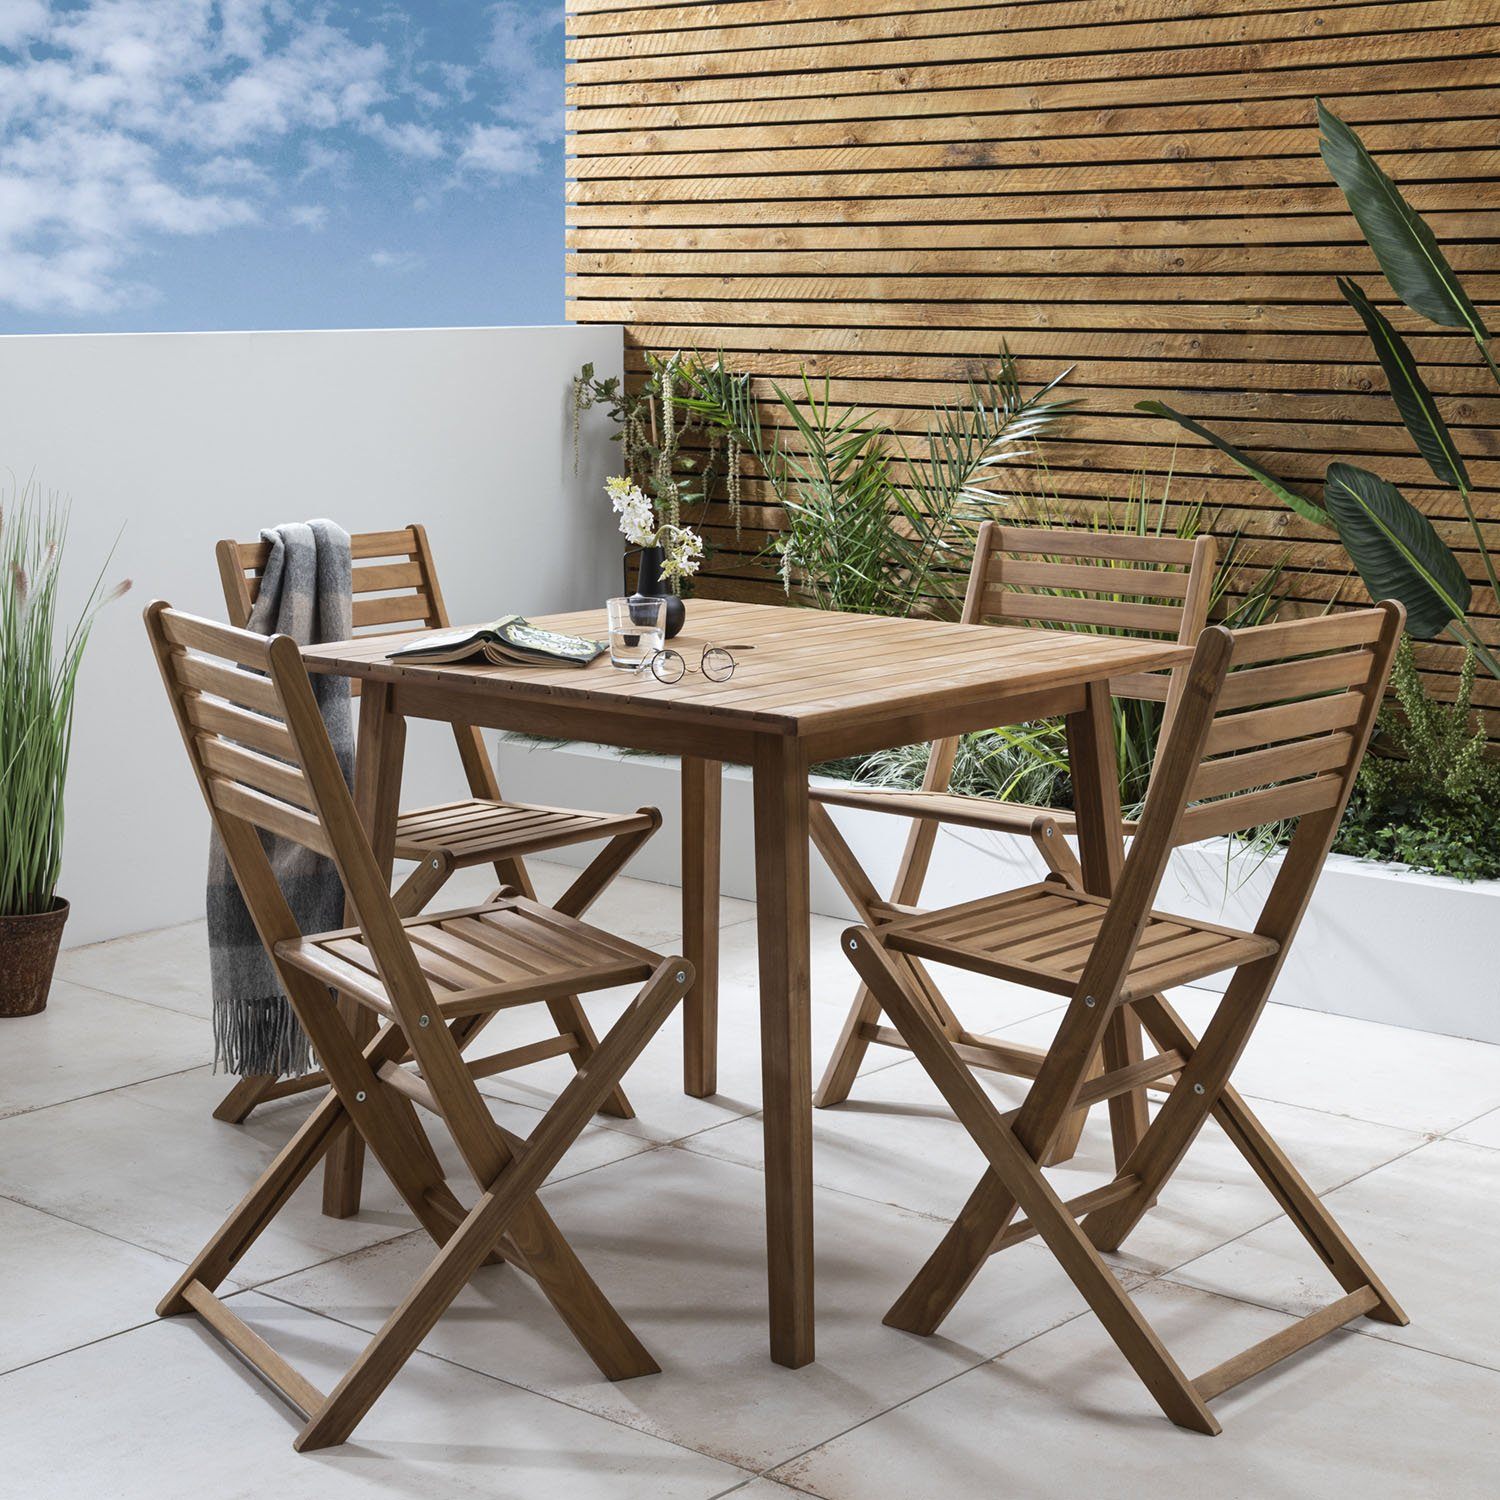 Ackley wooden garden furniture – 4 seater outdoor dining set with cream parasol - Laura James